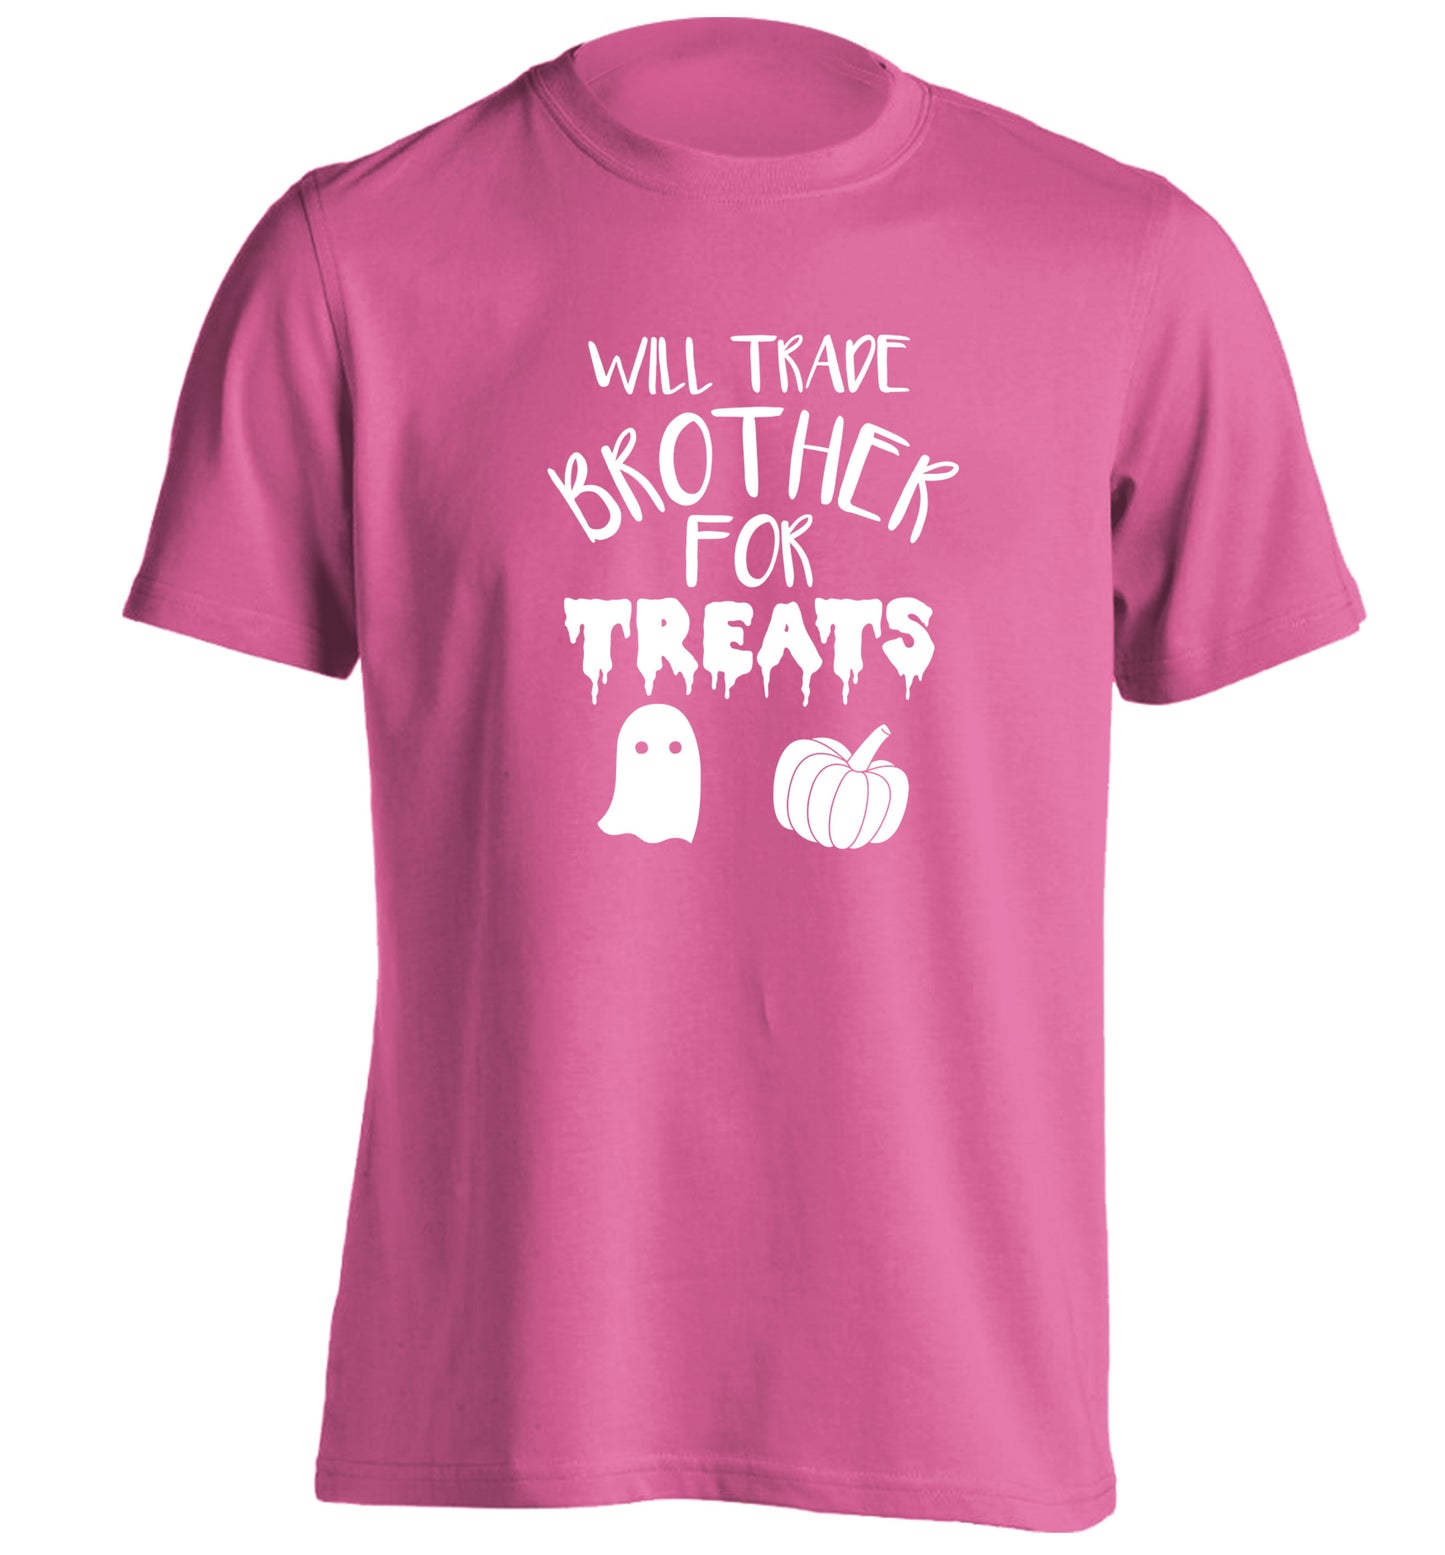 Will trade brother for treats adults unisex pink Tshirt 2XL